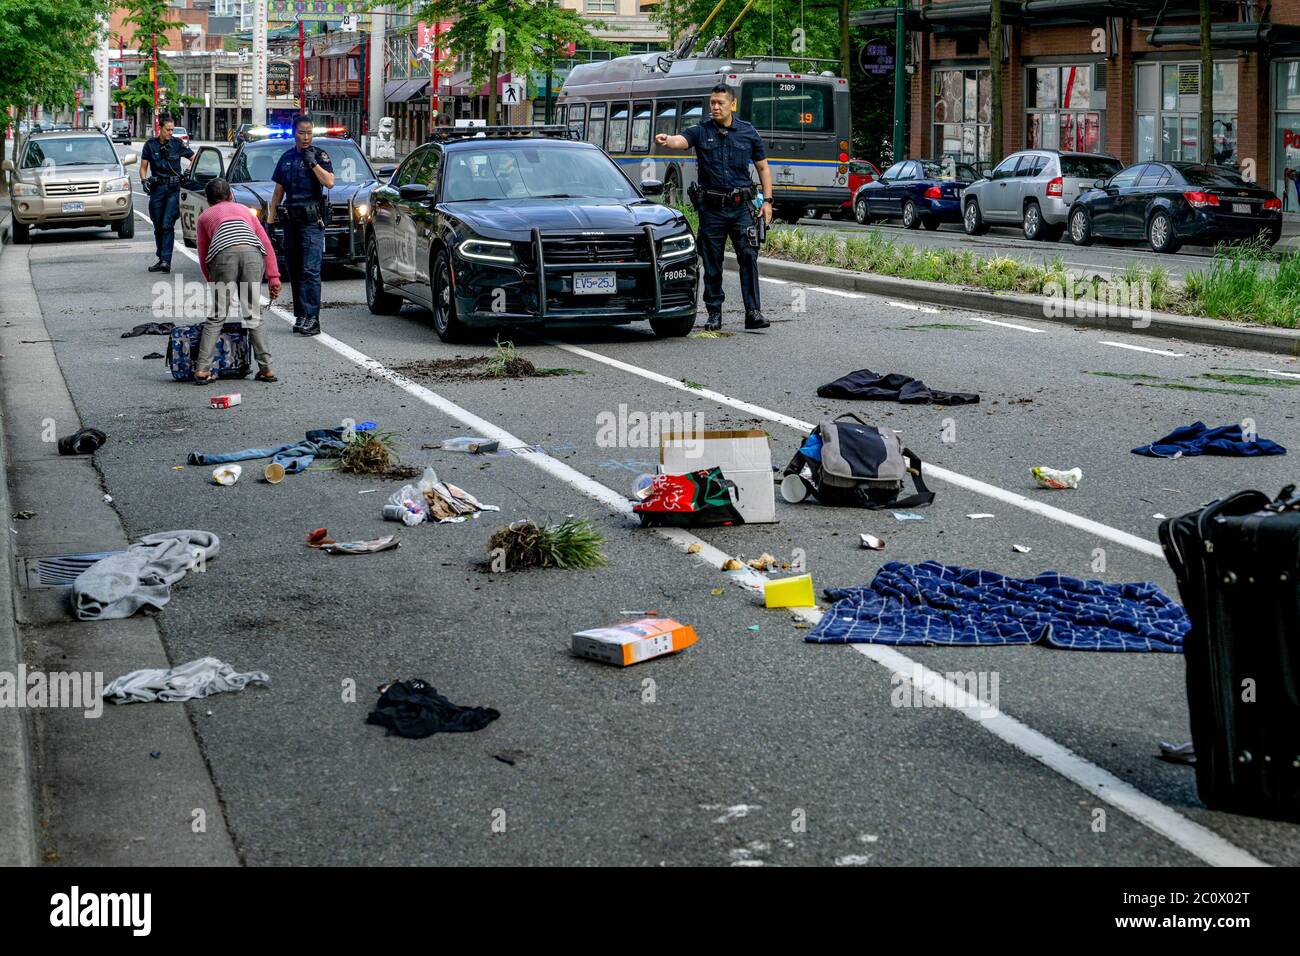 Vancouver Police respond to mentally ill woman with knife who dumped garbage all over street, Vancouver, British Columbia, Canada Stock Photo